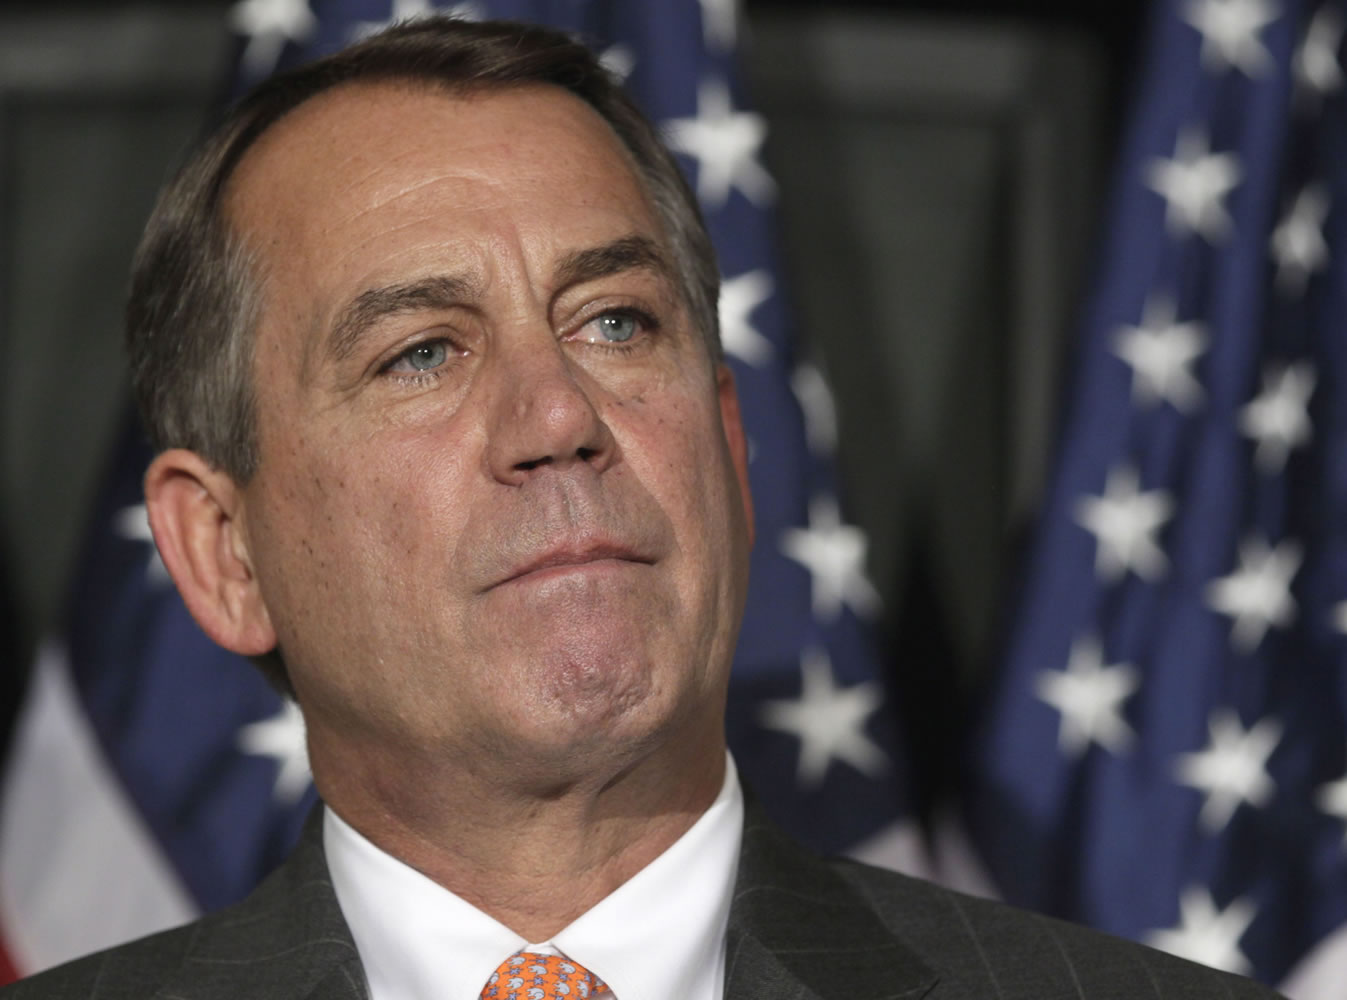 Speaker of the House John Boehner, R-Ohio, postponed a vote on his proposal to address the debt ceiling after reports said the bill would save less money than Boehner claimed.